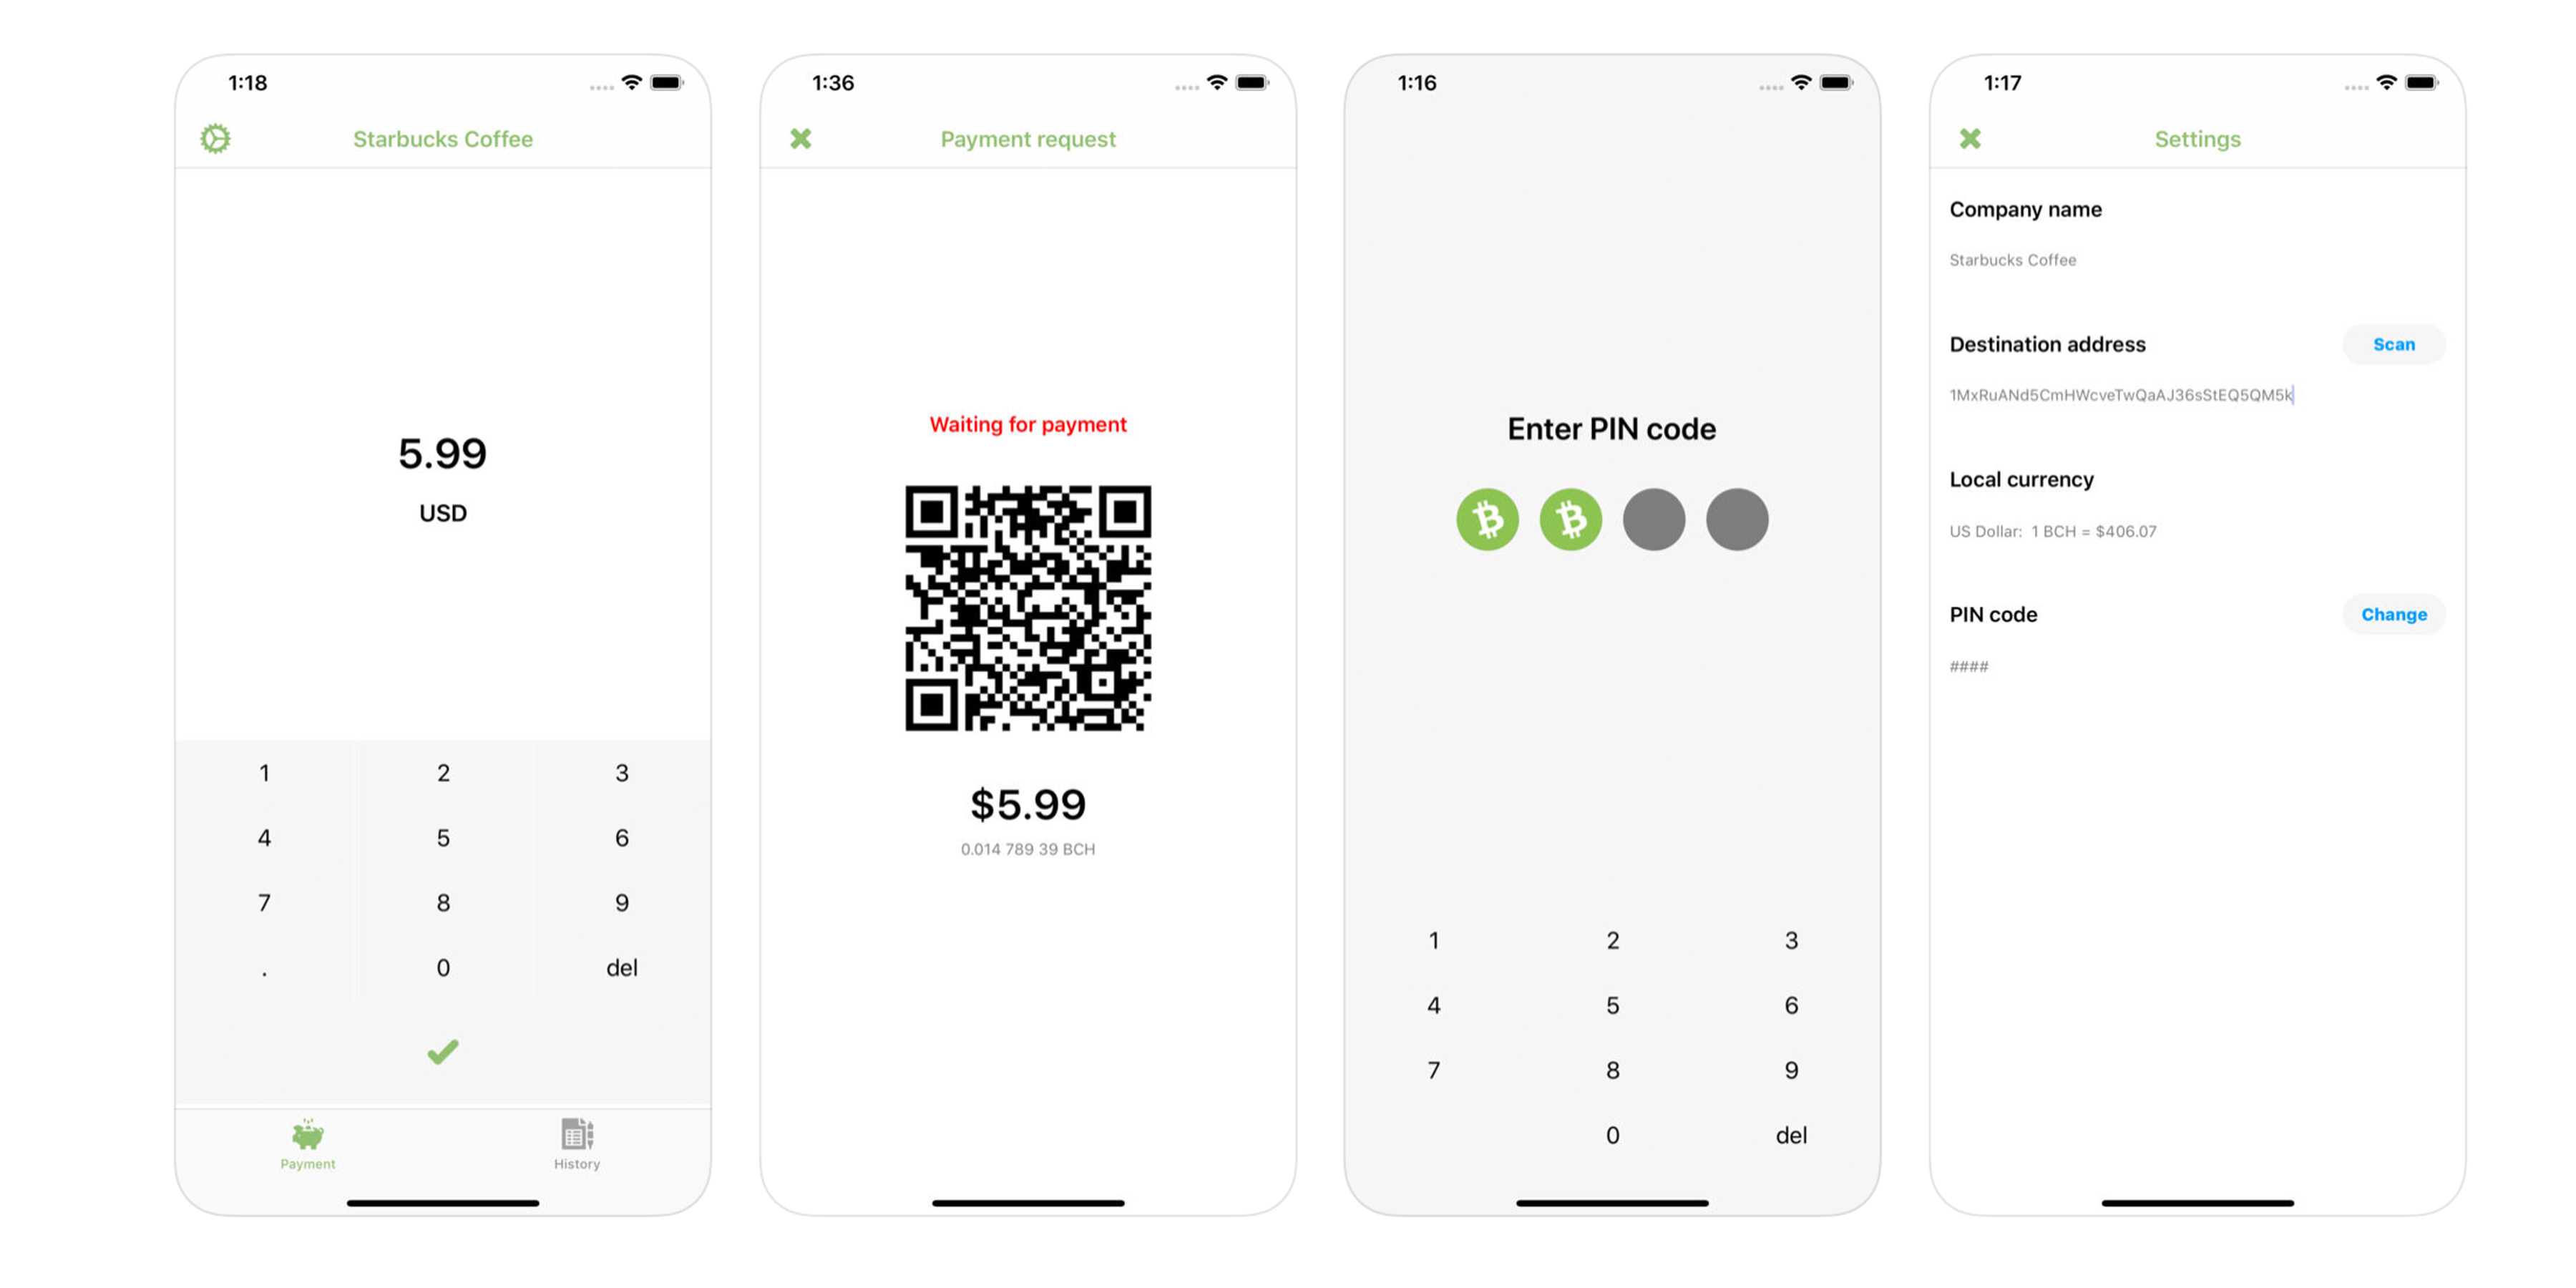 Bitcoin.com Launches Free Bitcoin Cash Register Platform for iOS Devices